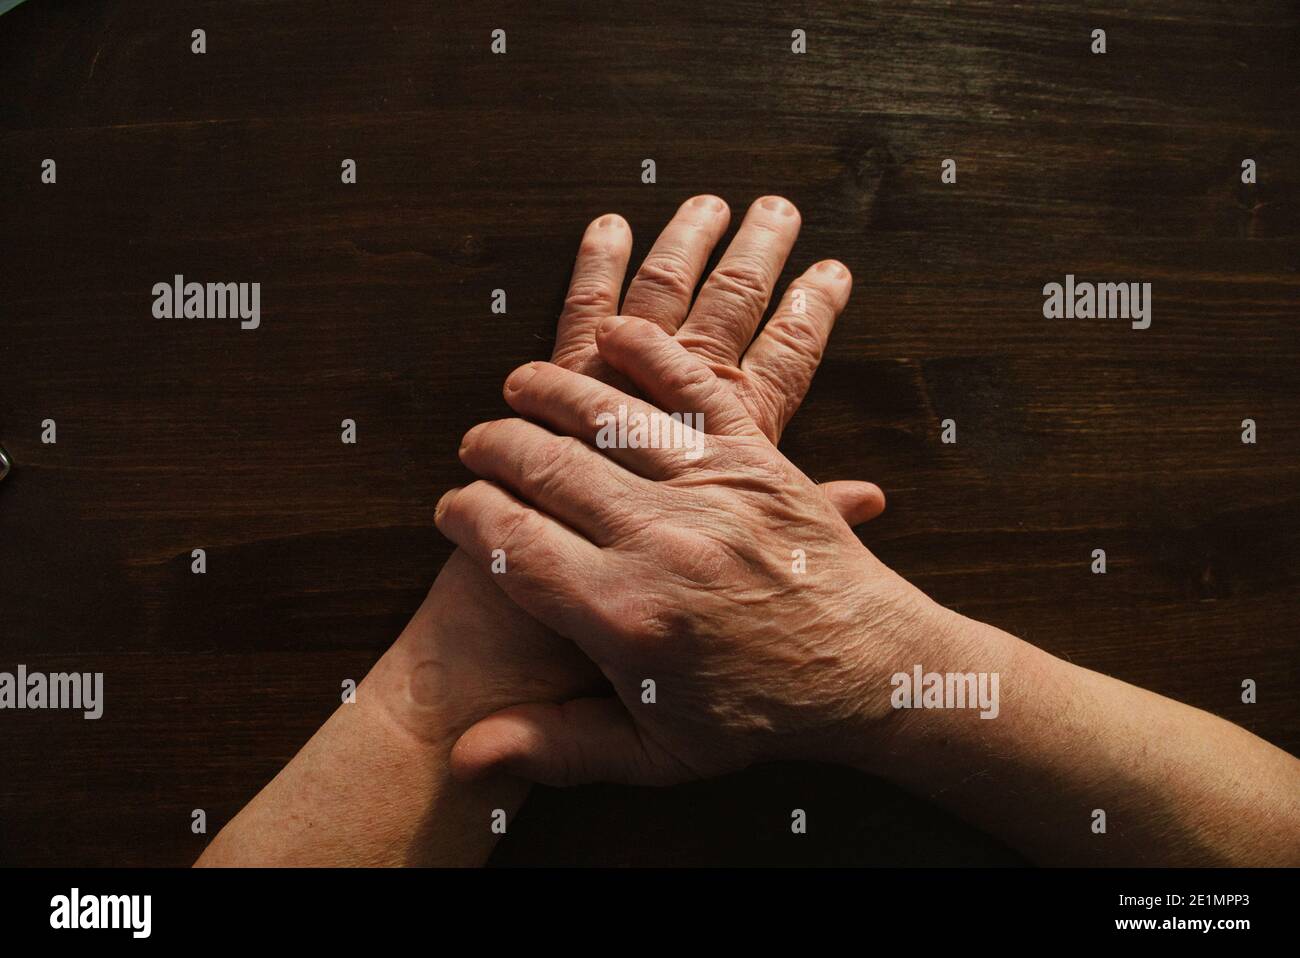 Hands and arms of old man lying on top of wooden table surface. Directly above. Stock Photo